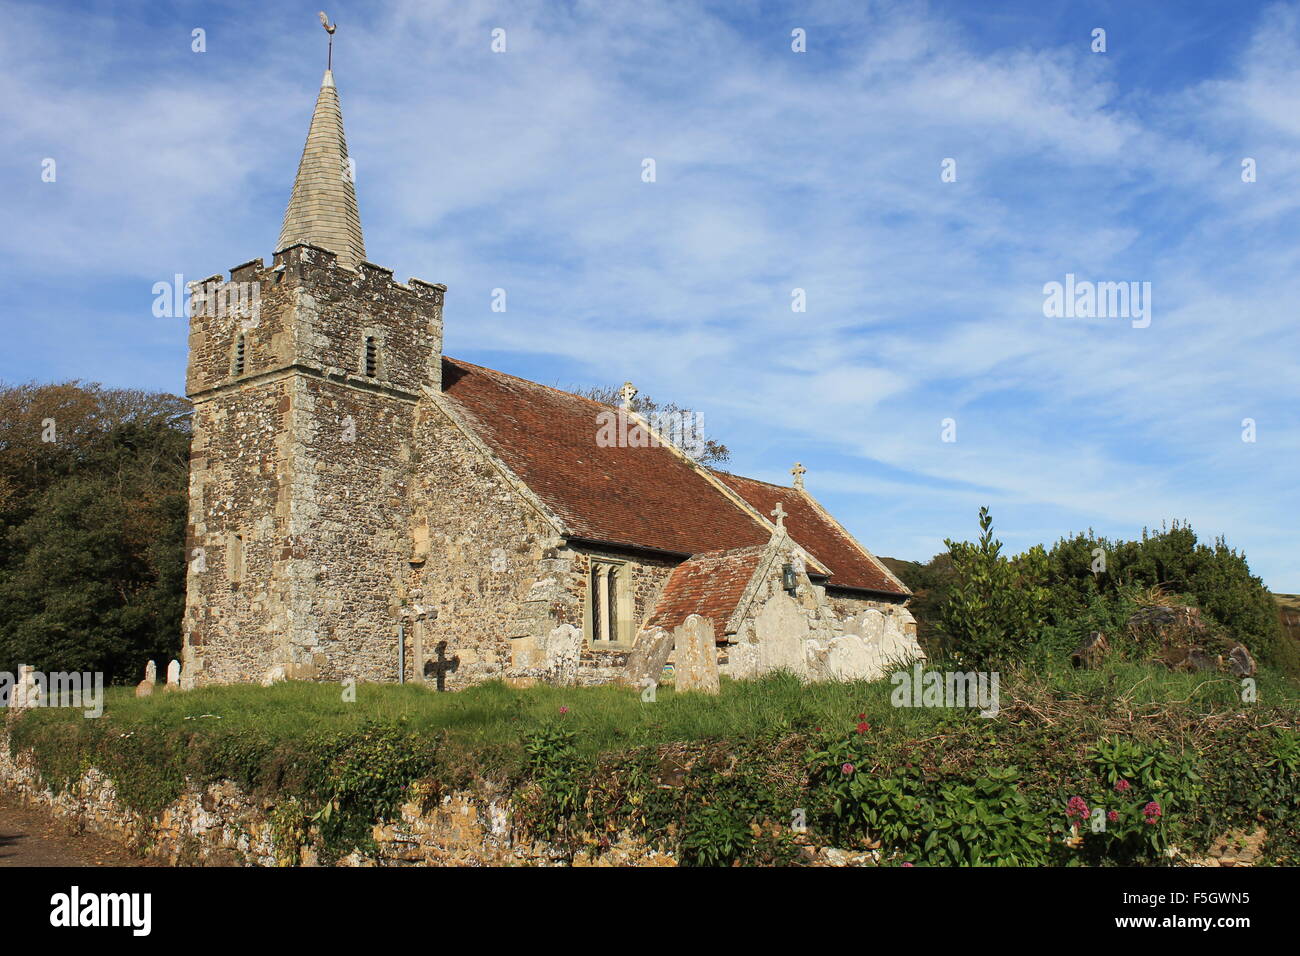 The medieval 12th-century St Peter and St Paul's Church, Mottistone, Isle of Wight, England, UK Stock Photo